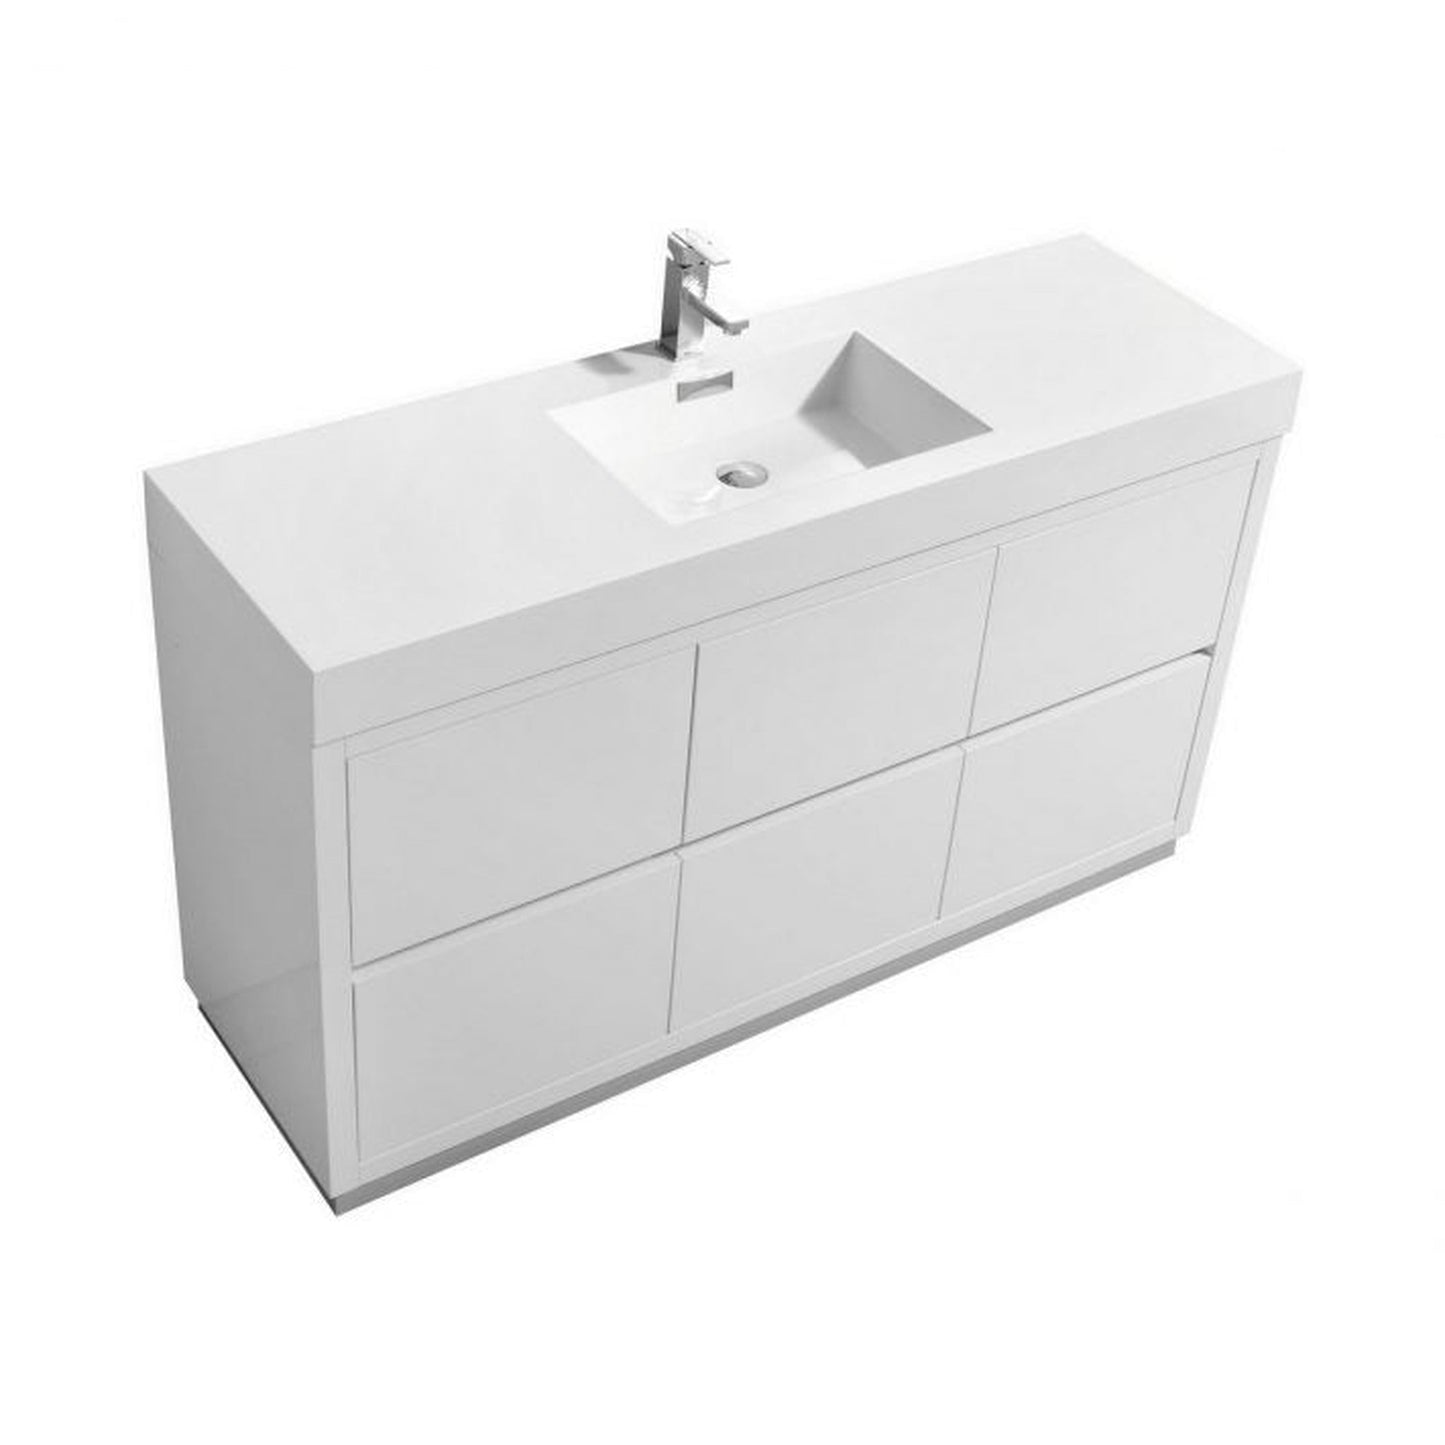 KubeBath Bliss 60" High Gloss White Freestanding Modern Bathroom Vanity With Single Integrated Acrylic Sink With Overflow and 60" White Framed Mirror With Shelf